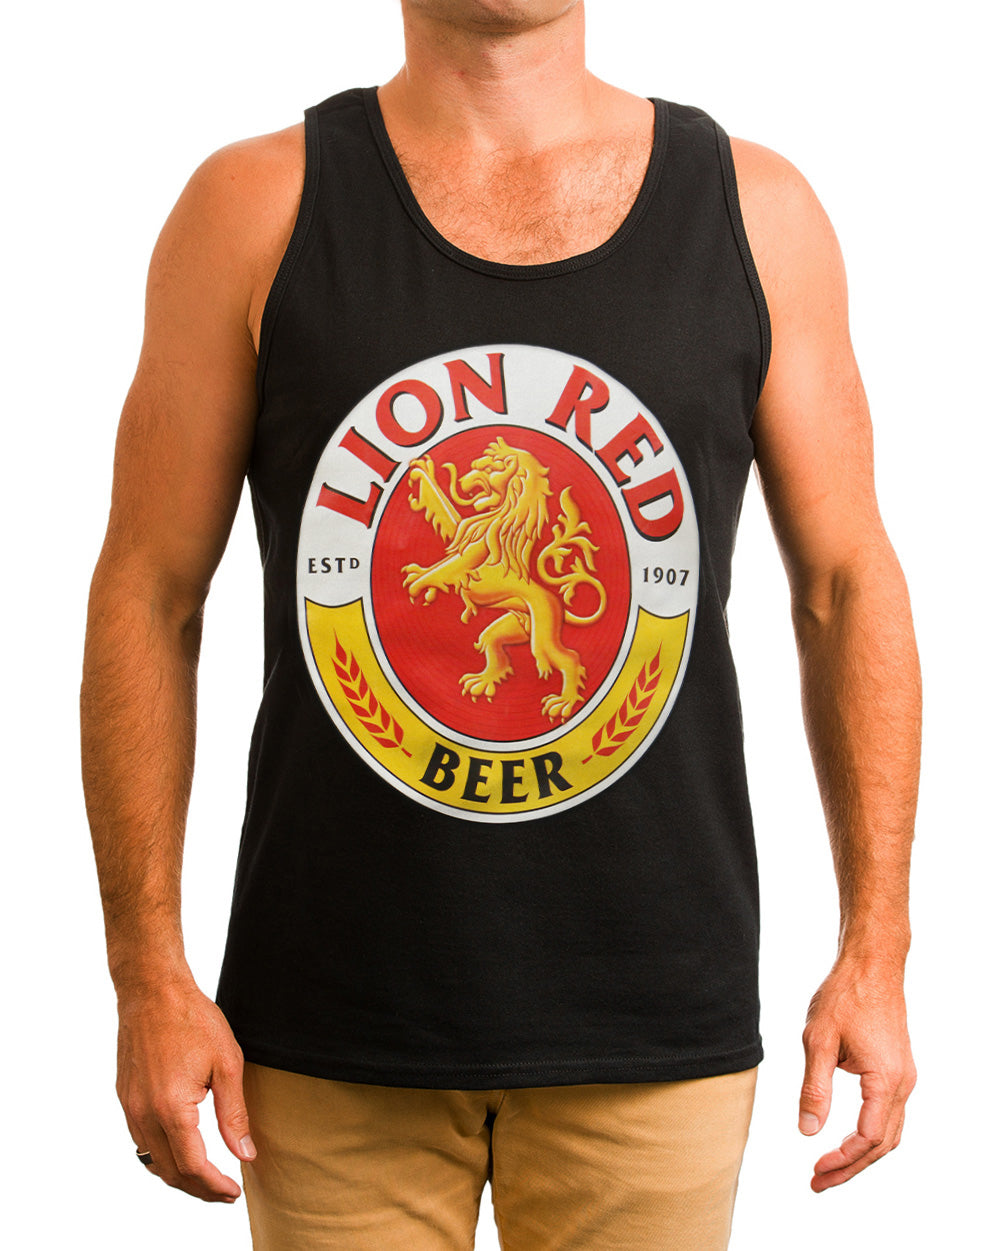 Lion Red Singlet -  Beer Gear Apparel & Merchandise - Speights - Lion Red - VB - Tokyo Dy merch